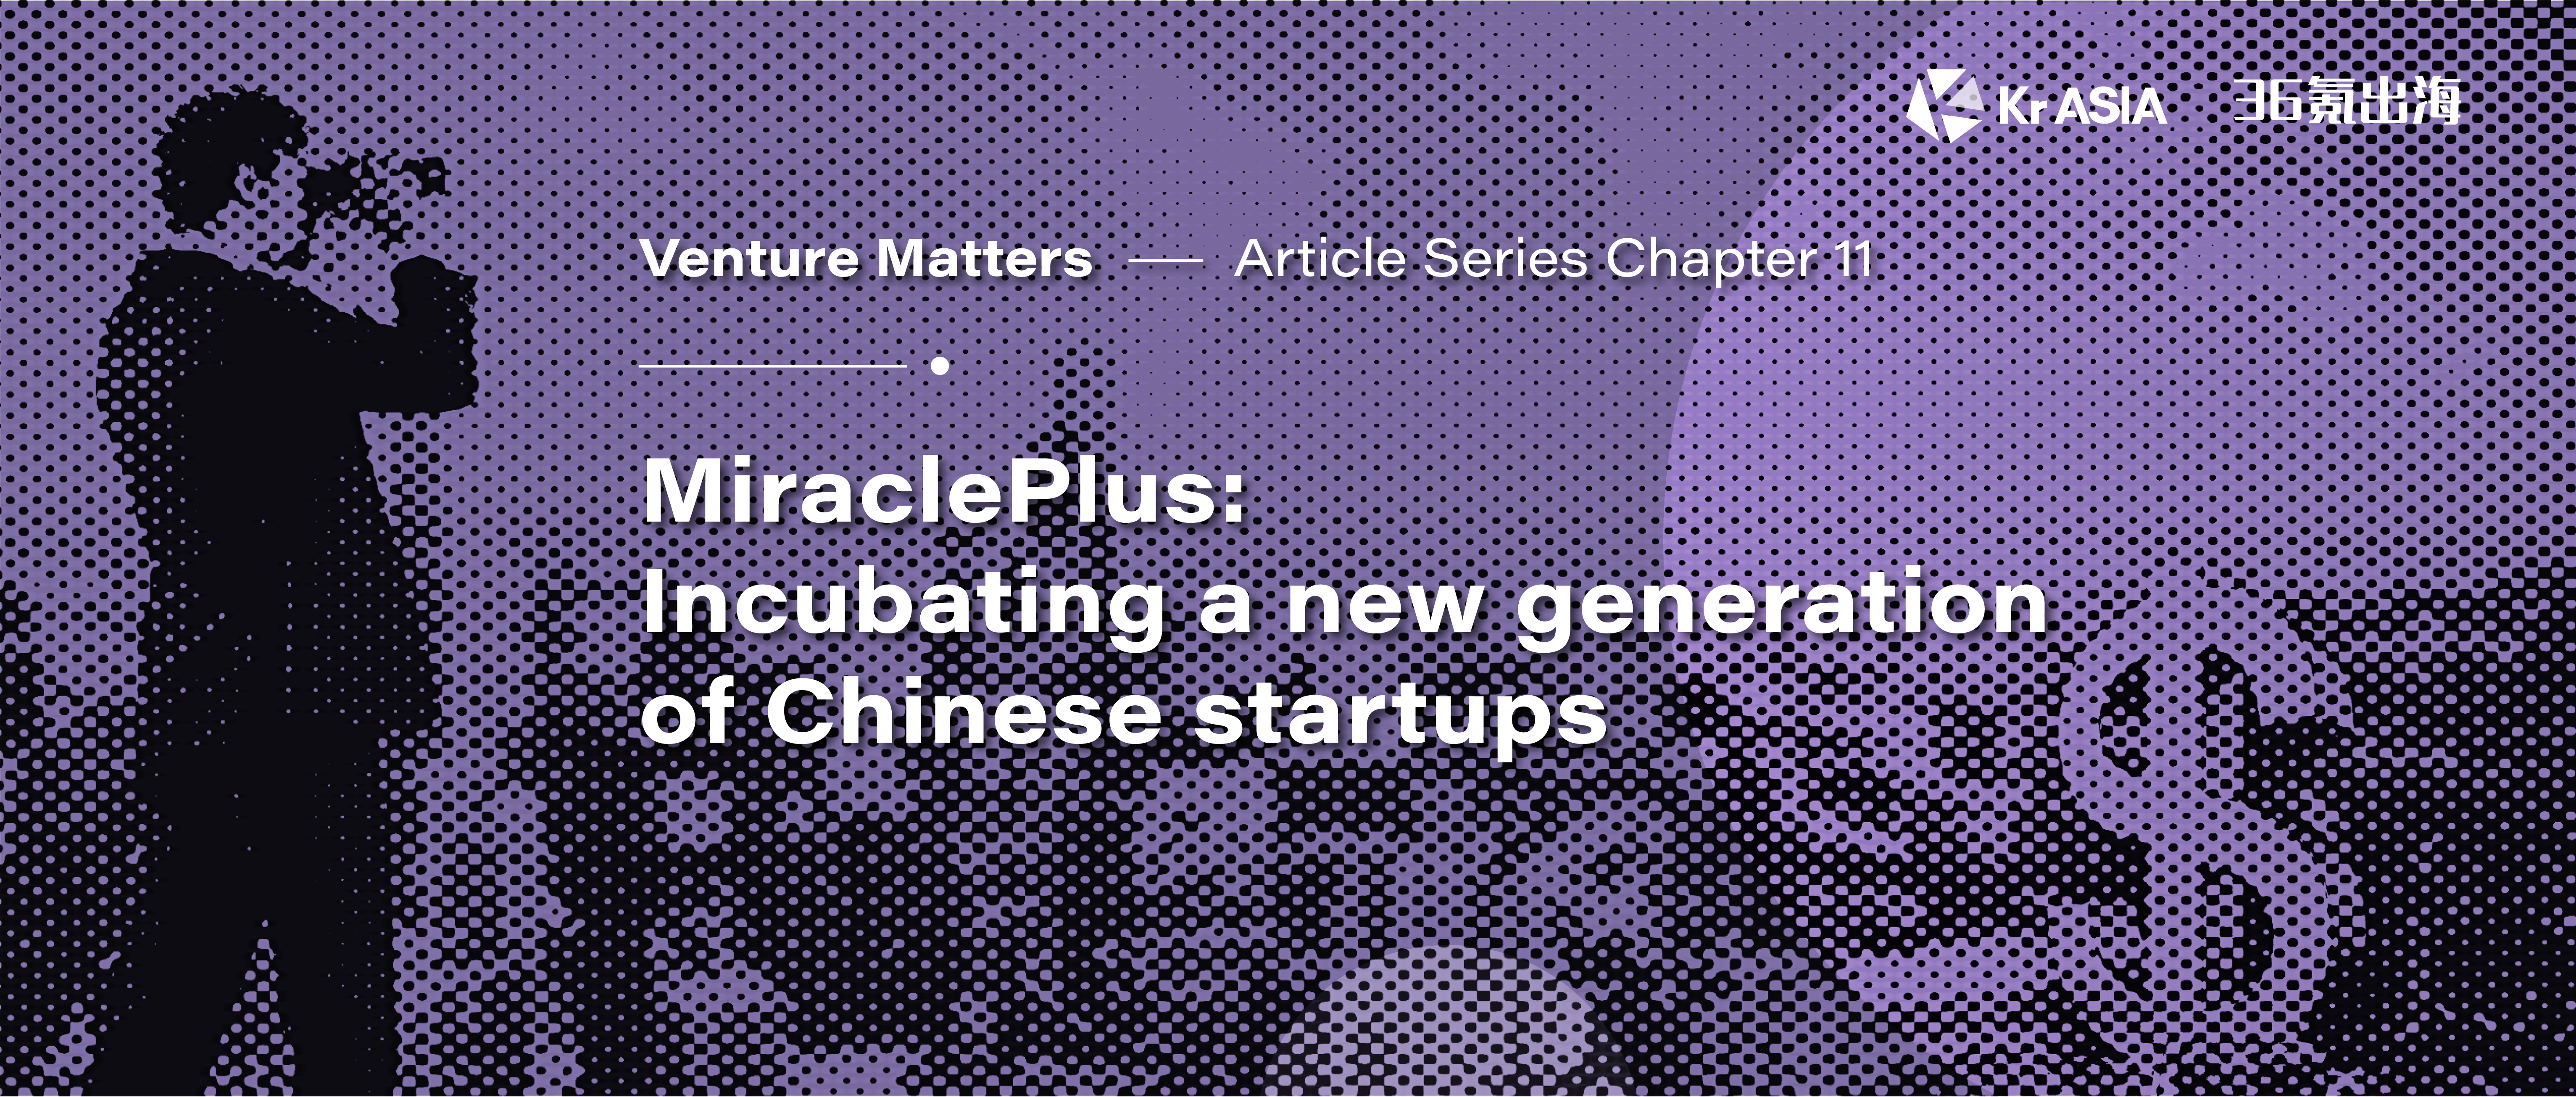 Venture Matters | MiraclePlus: Incubating a new generation of Chinese startups